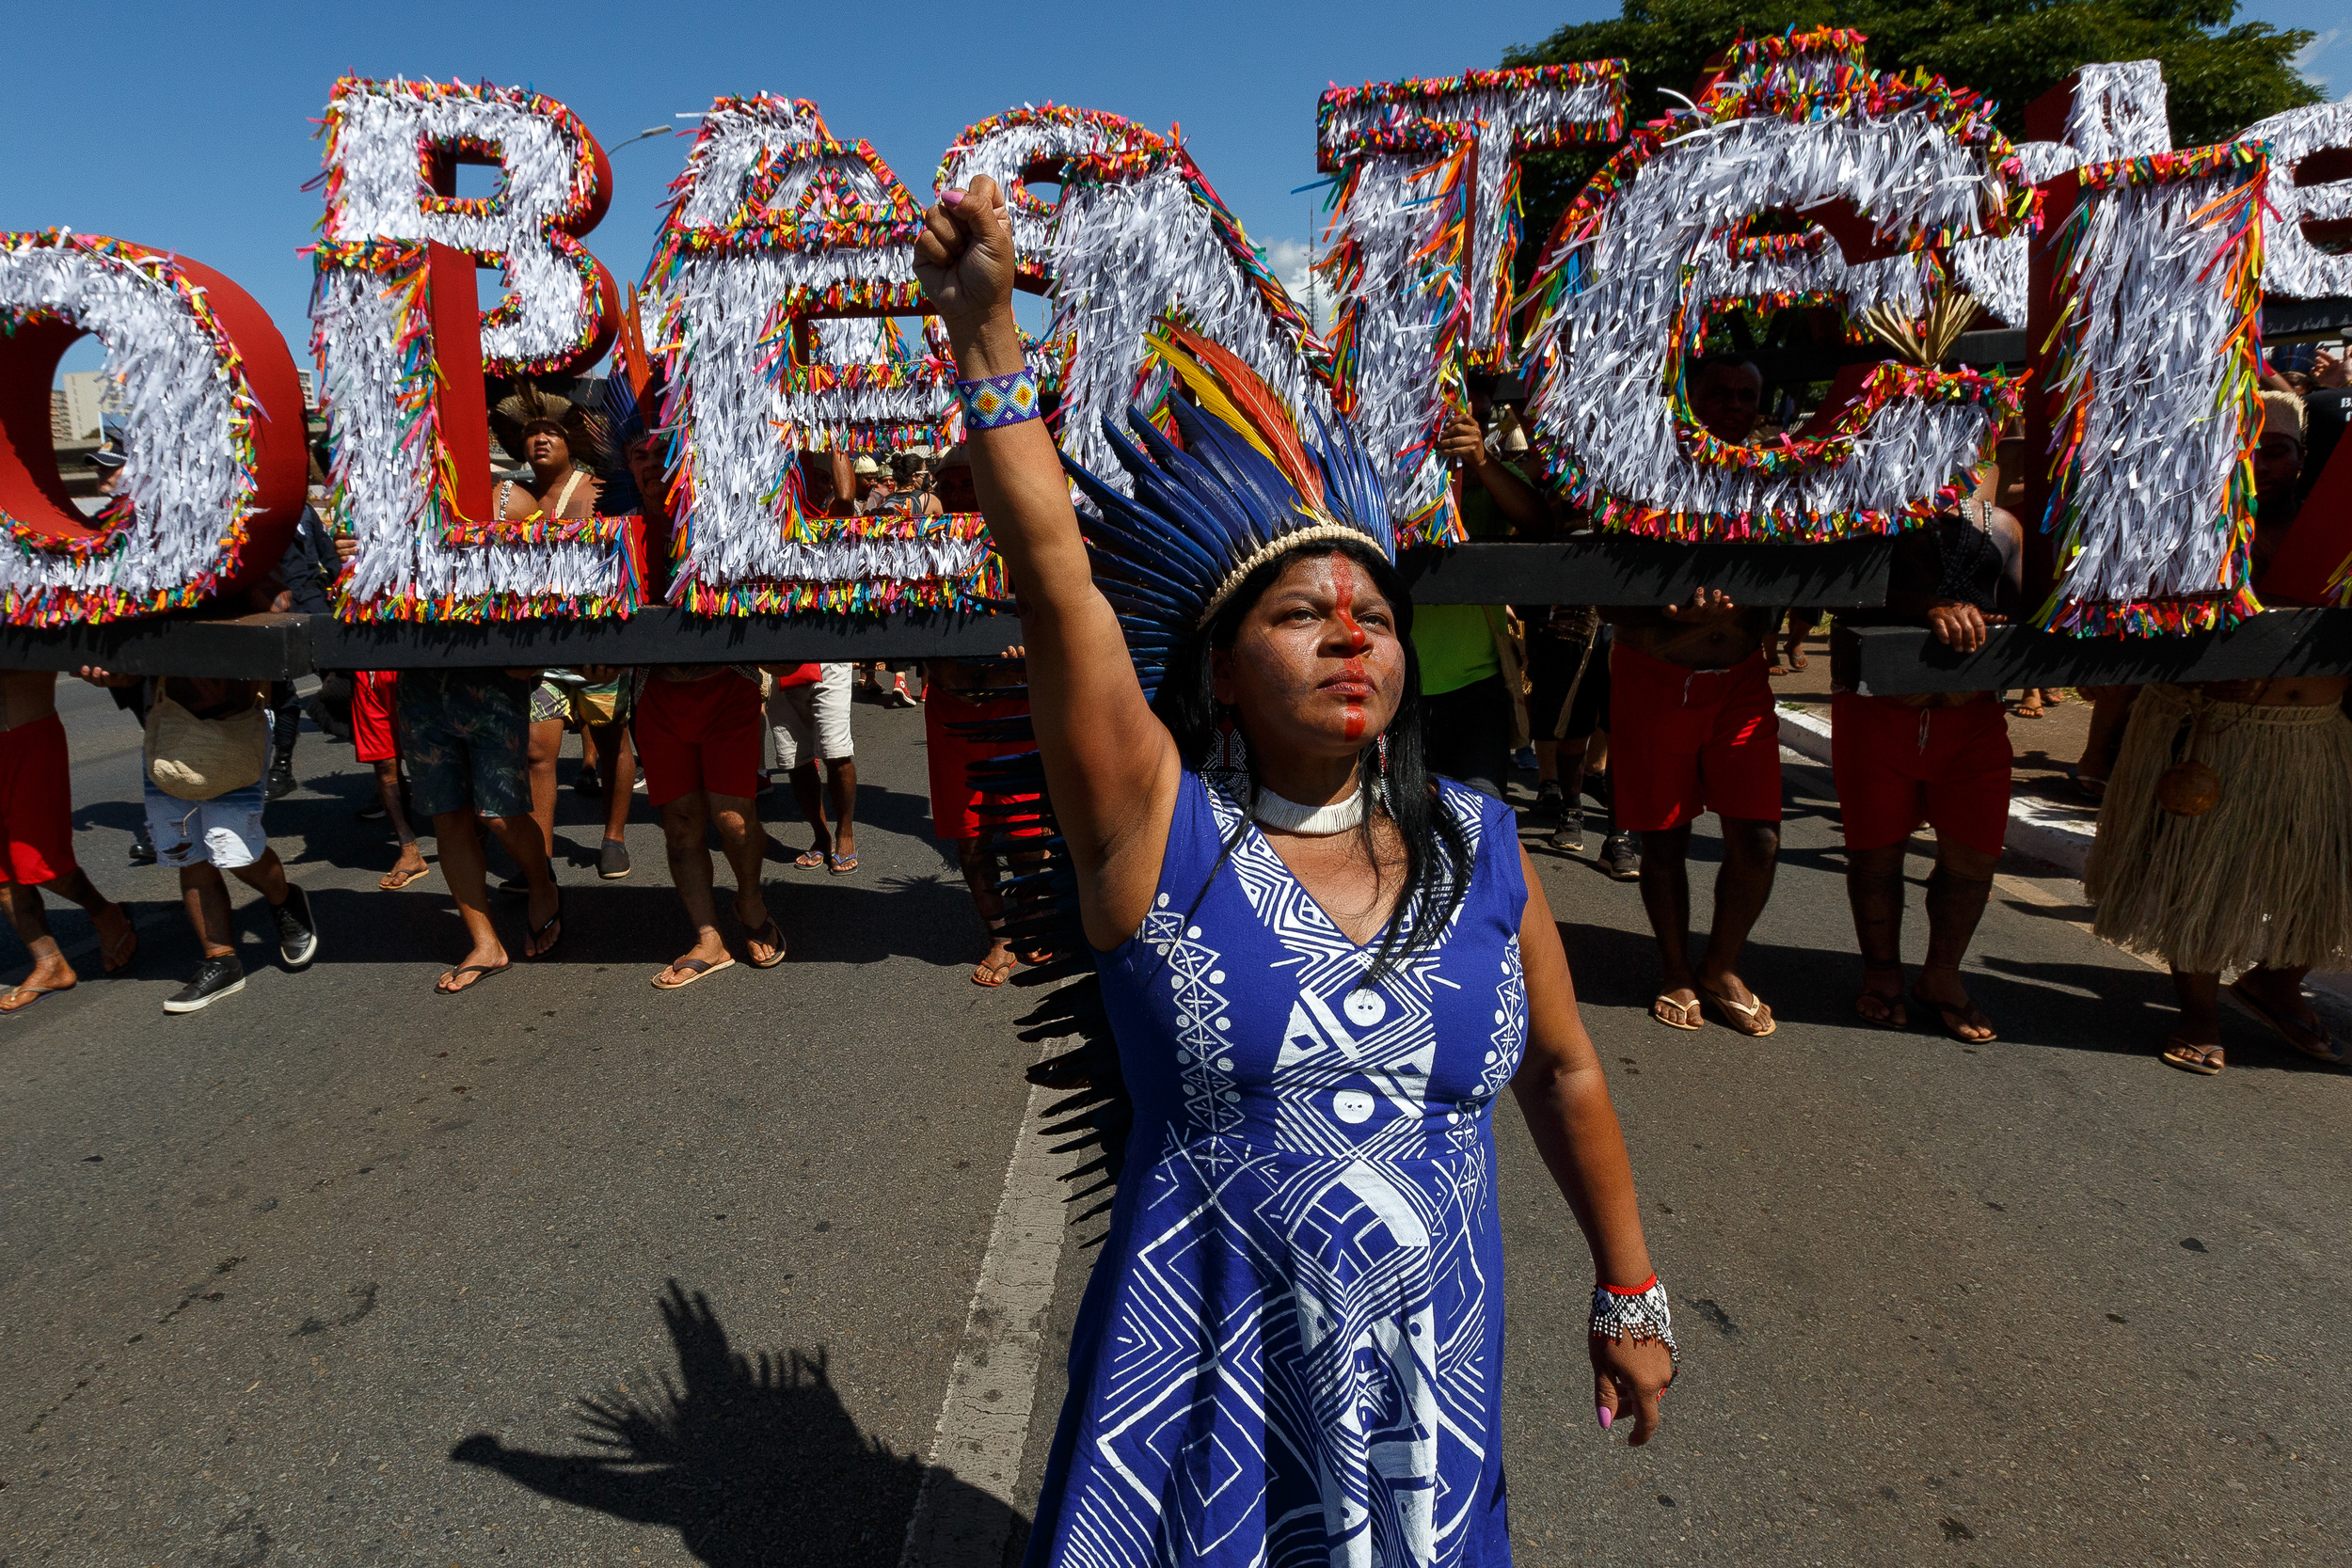 A woman with a blue yellow and red feather headdress and blue patterned dress stands on a road with her arm held high, in front of a colourful and glittery display of large lettering under which the legs of the people holding them can be seen